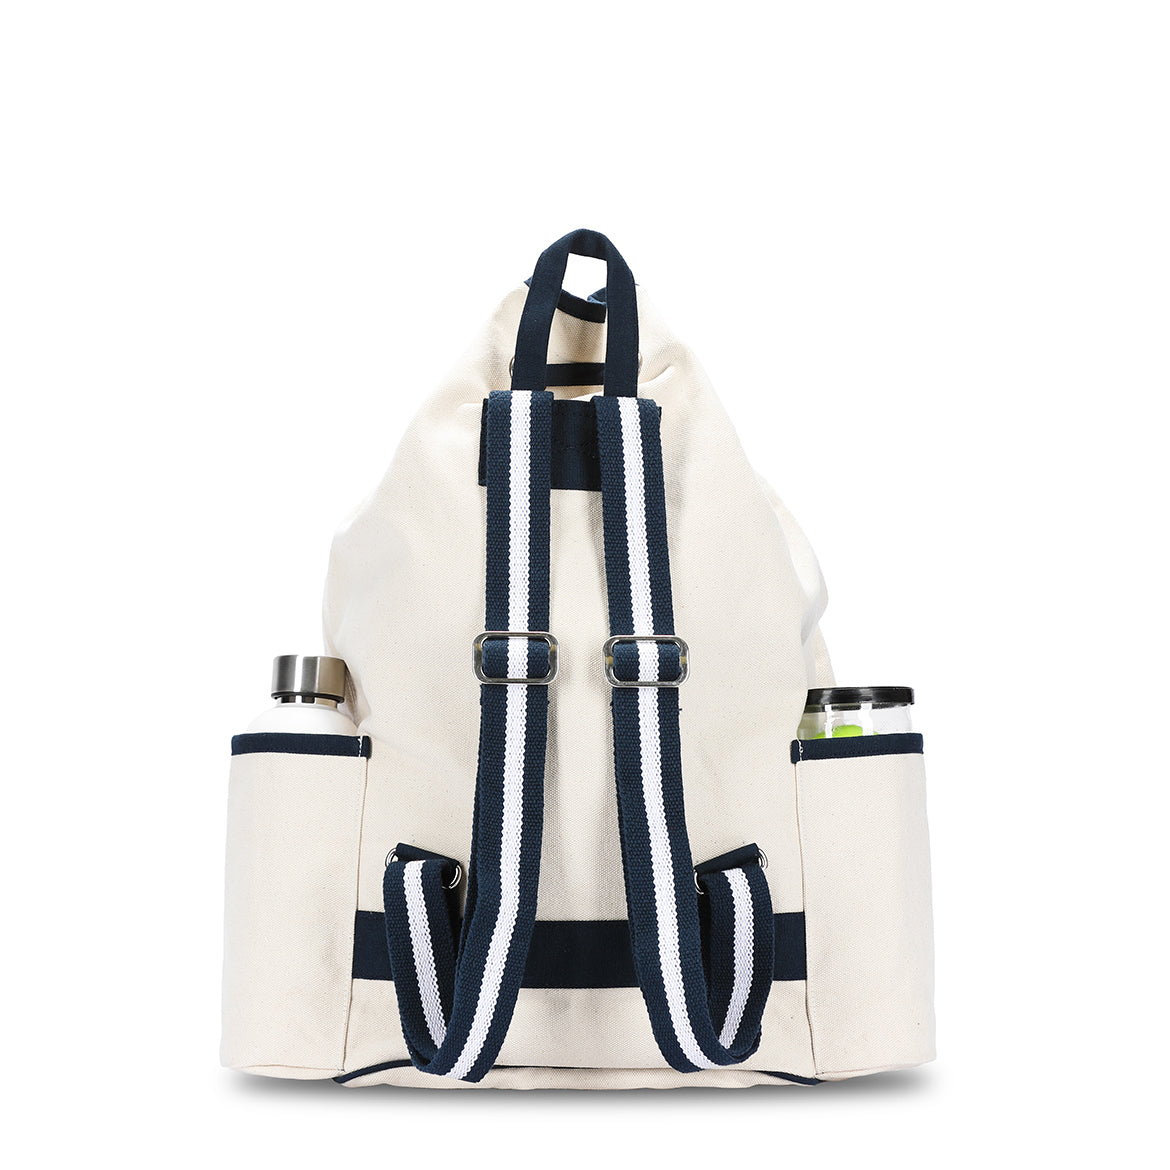 Back view of canvas tennis backpack with navy trim and straps